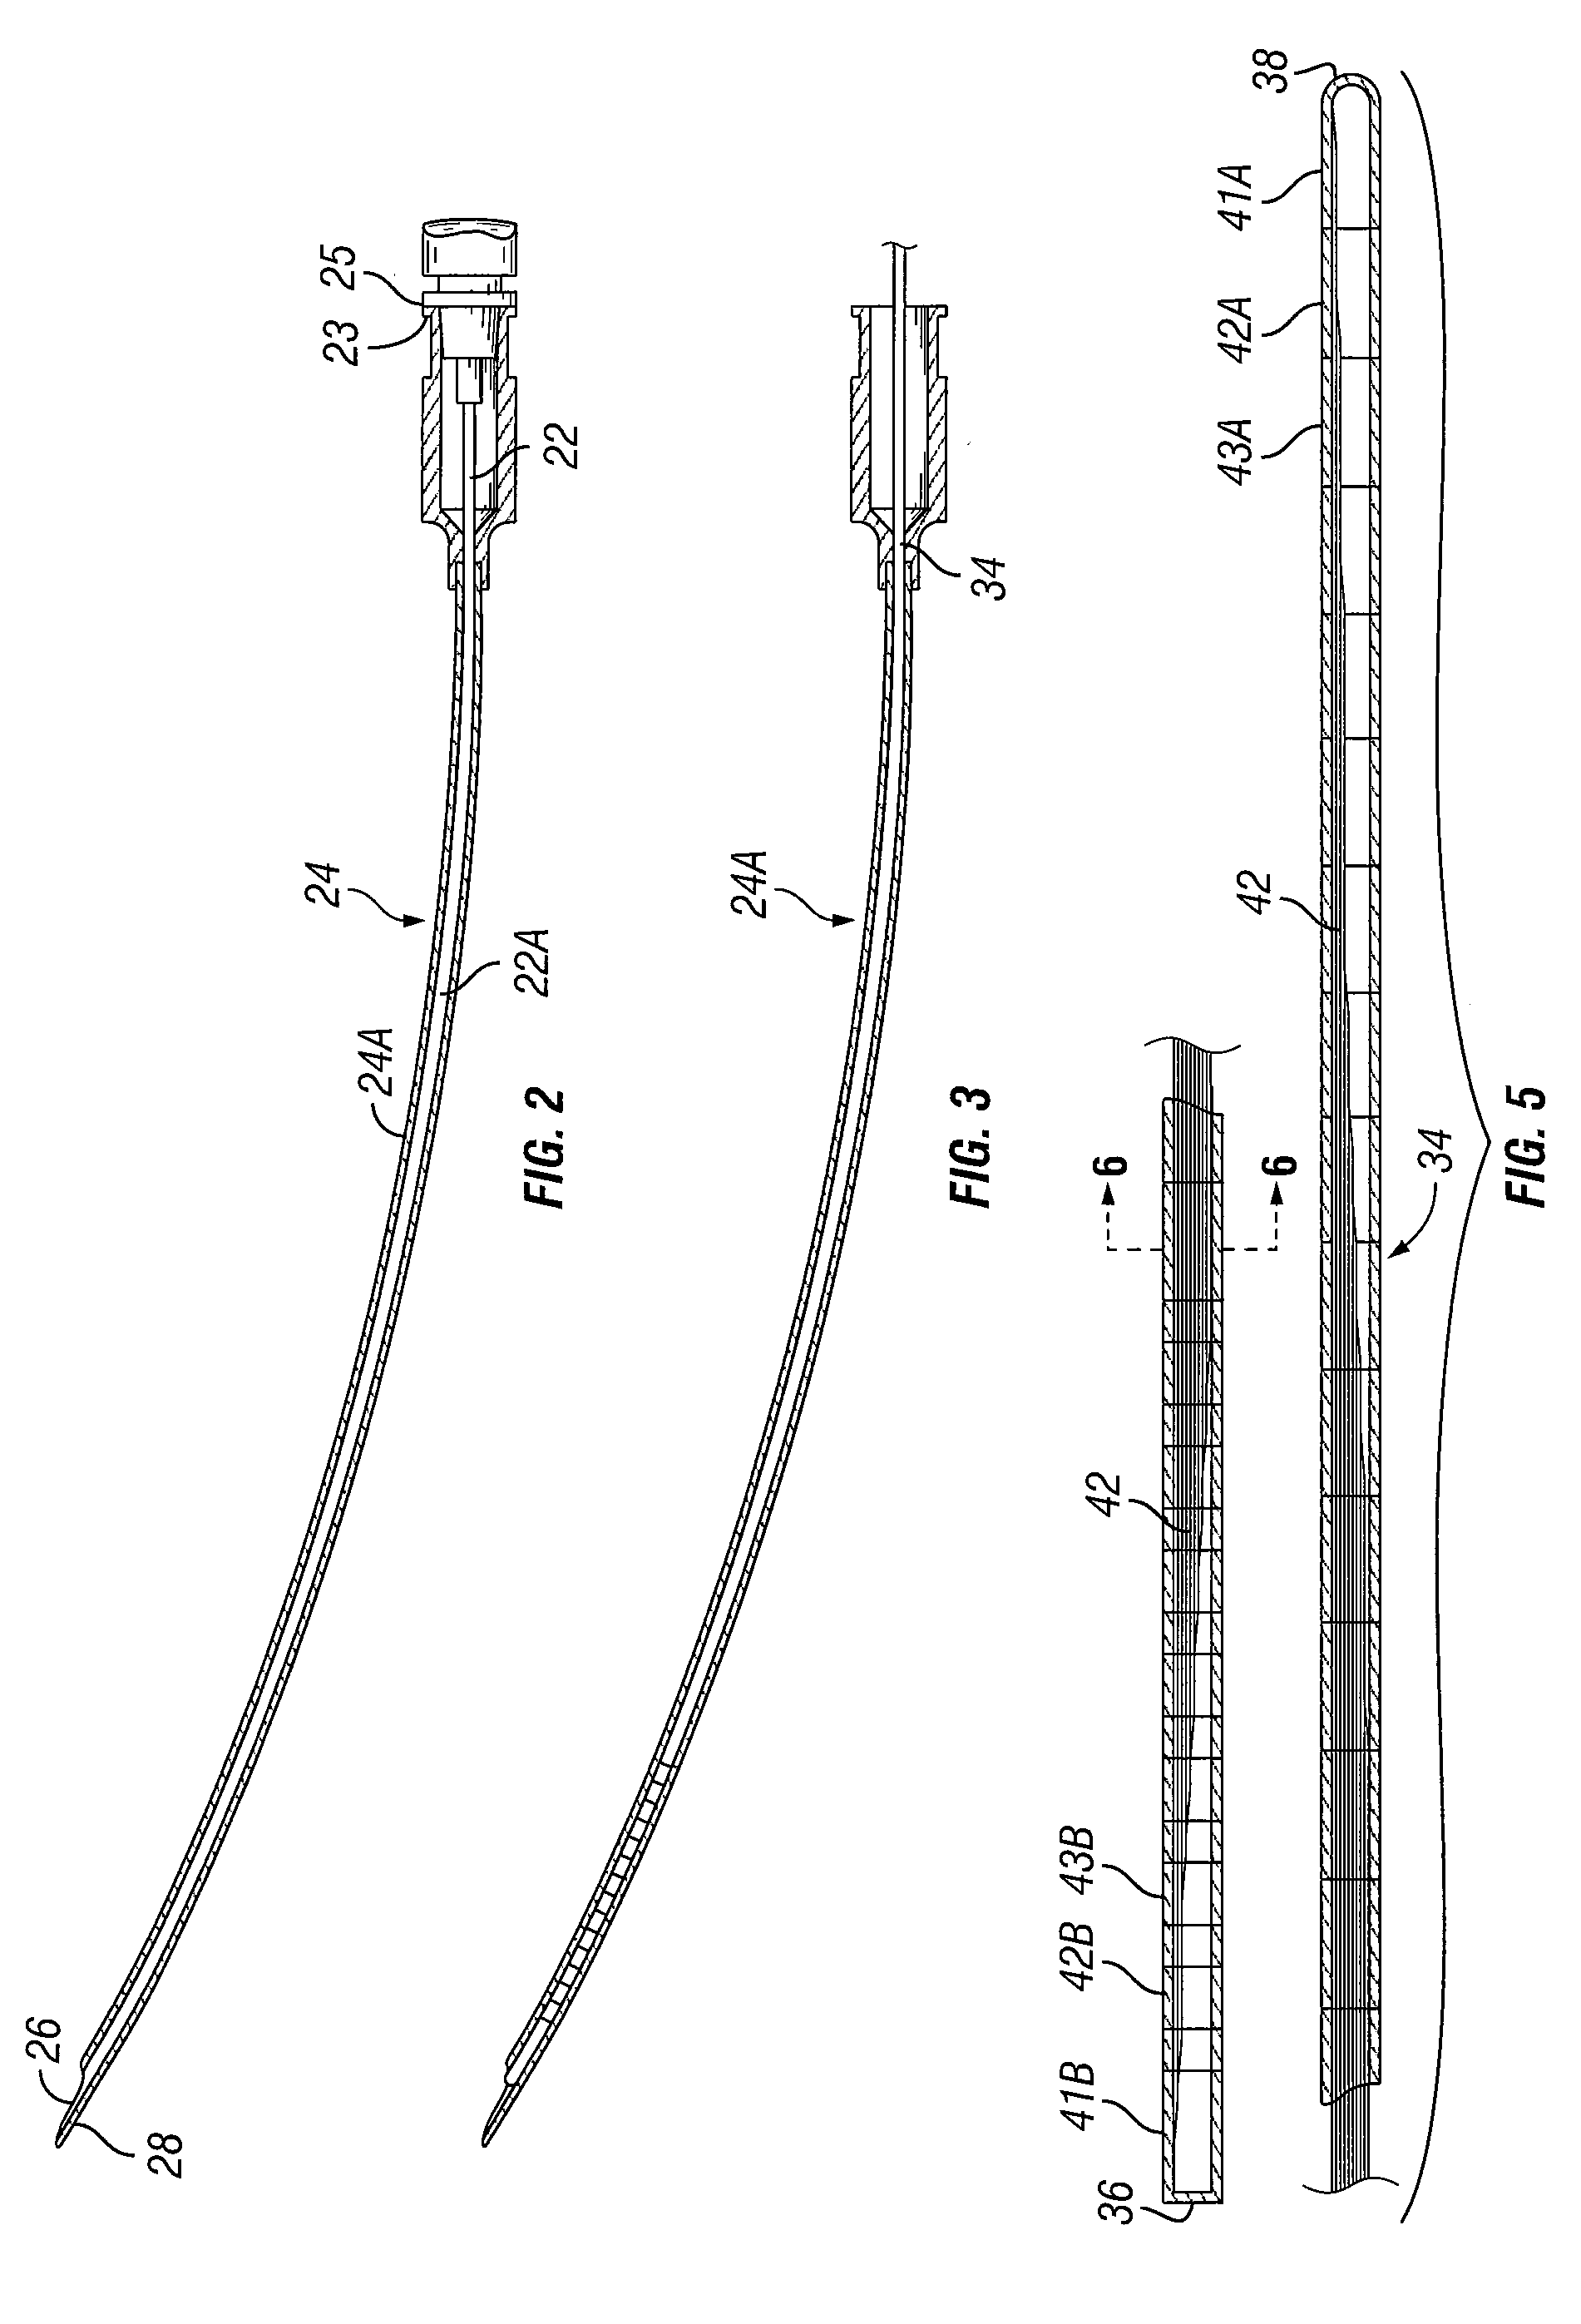 Peripheral nerve field stimulator curved subcutaneous introducer needle with wing attachment specification